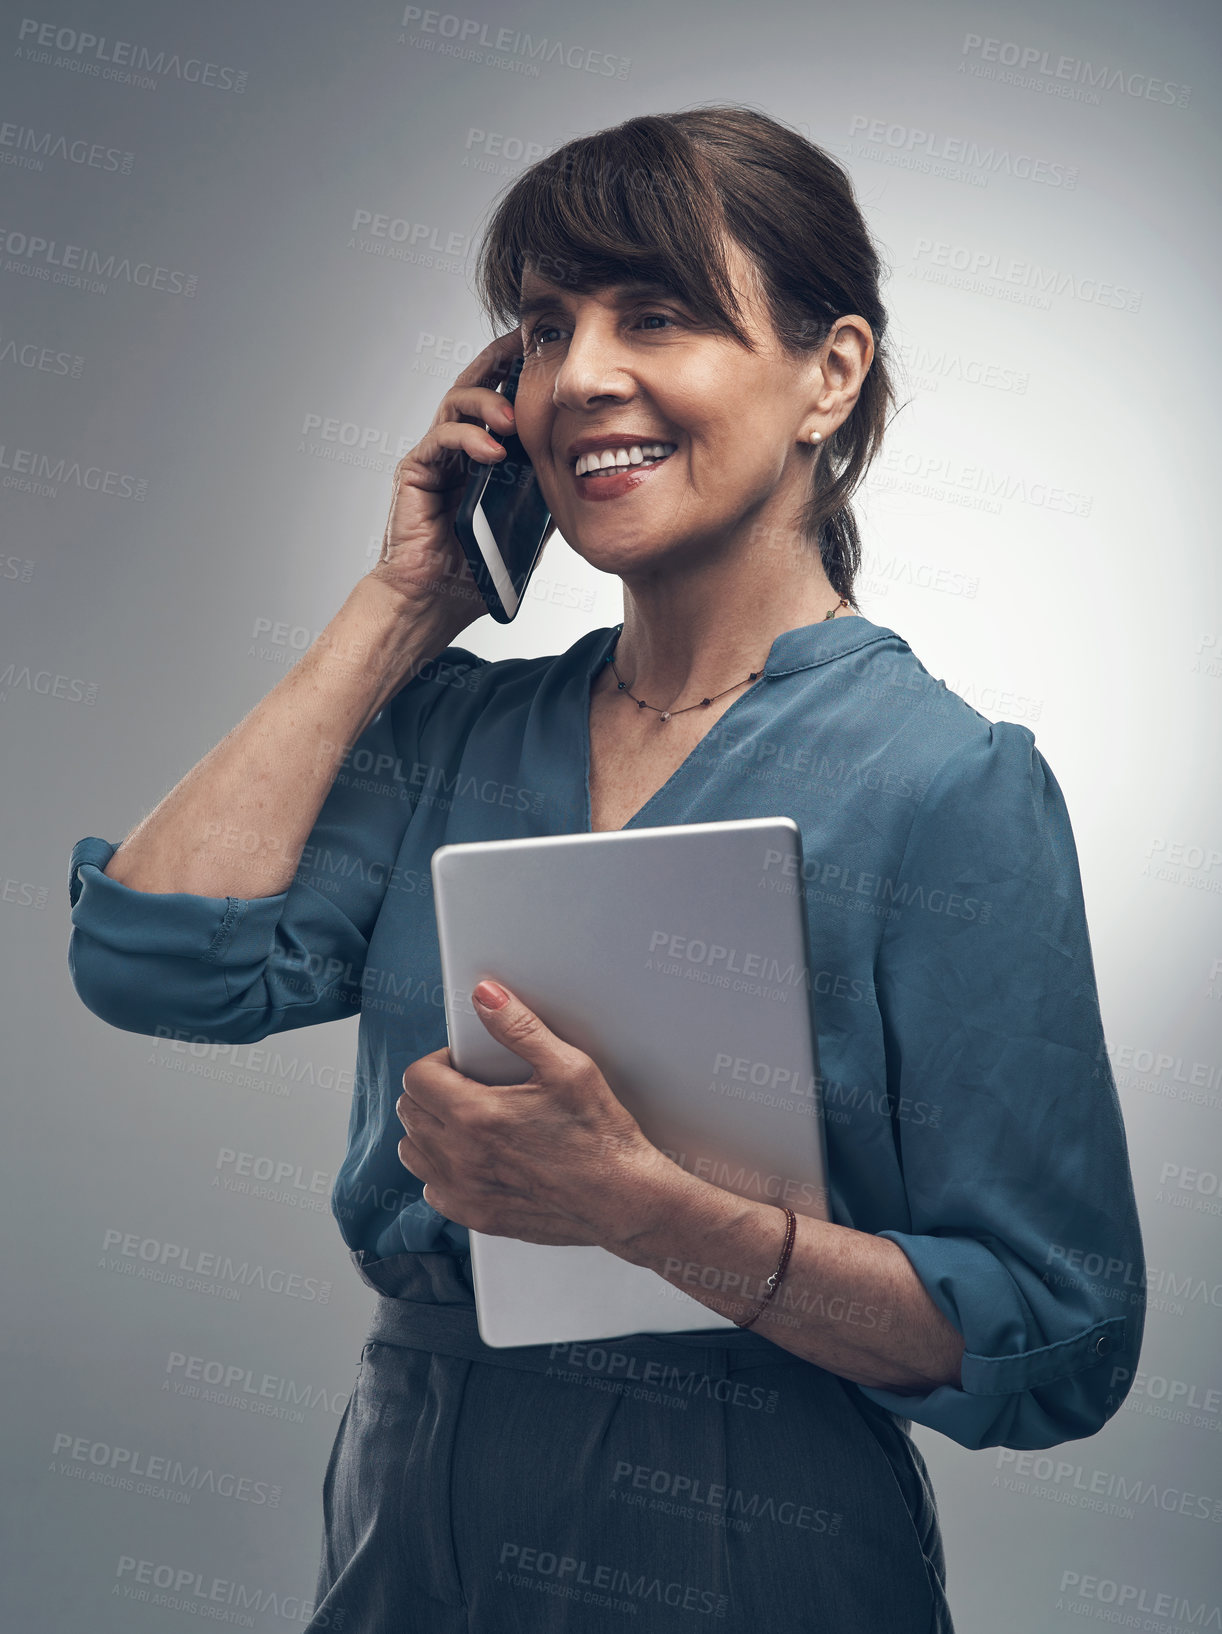 Buy stock photo Studio shot of a senior woman talking on a cellphone while holding a digital tablet against a grey background